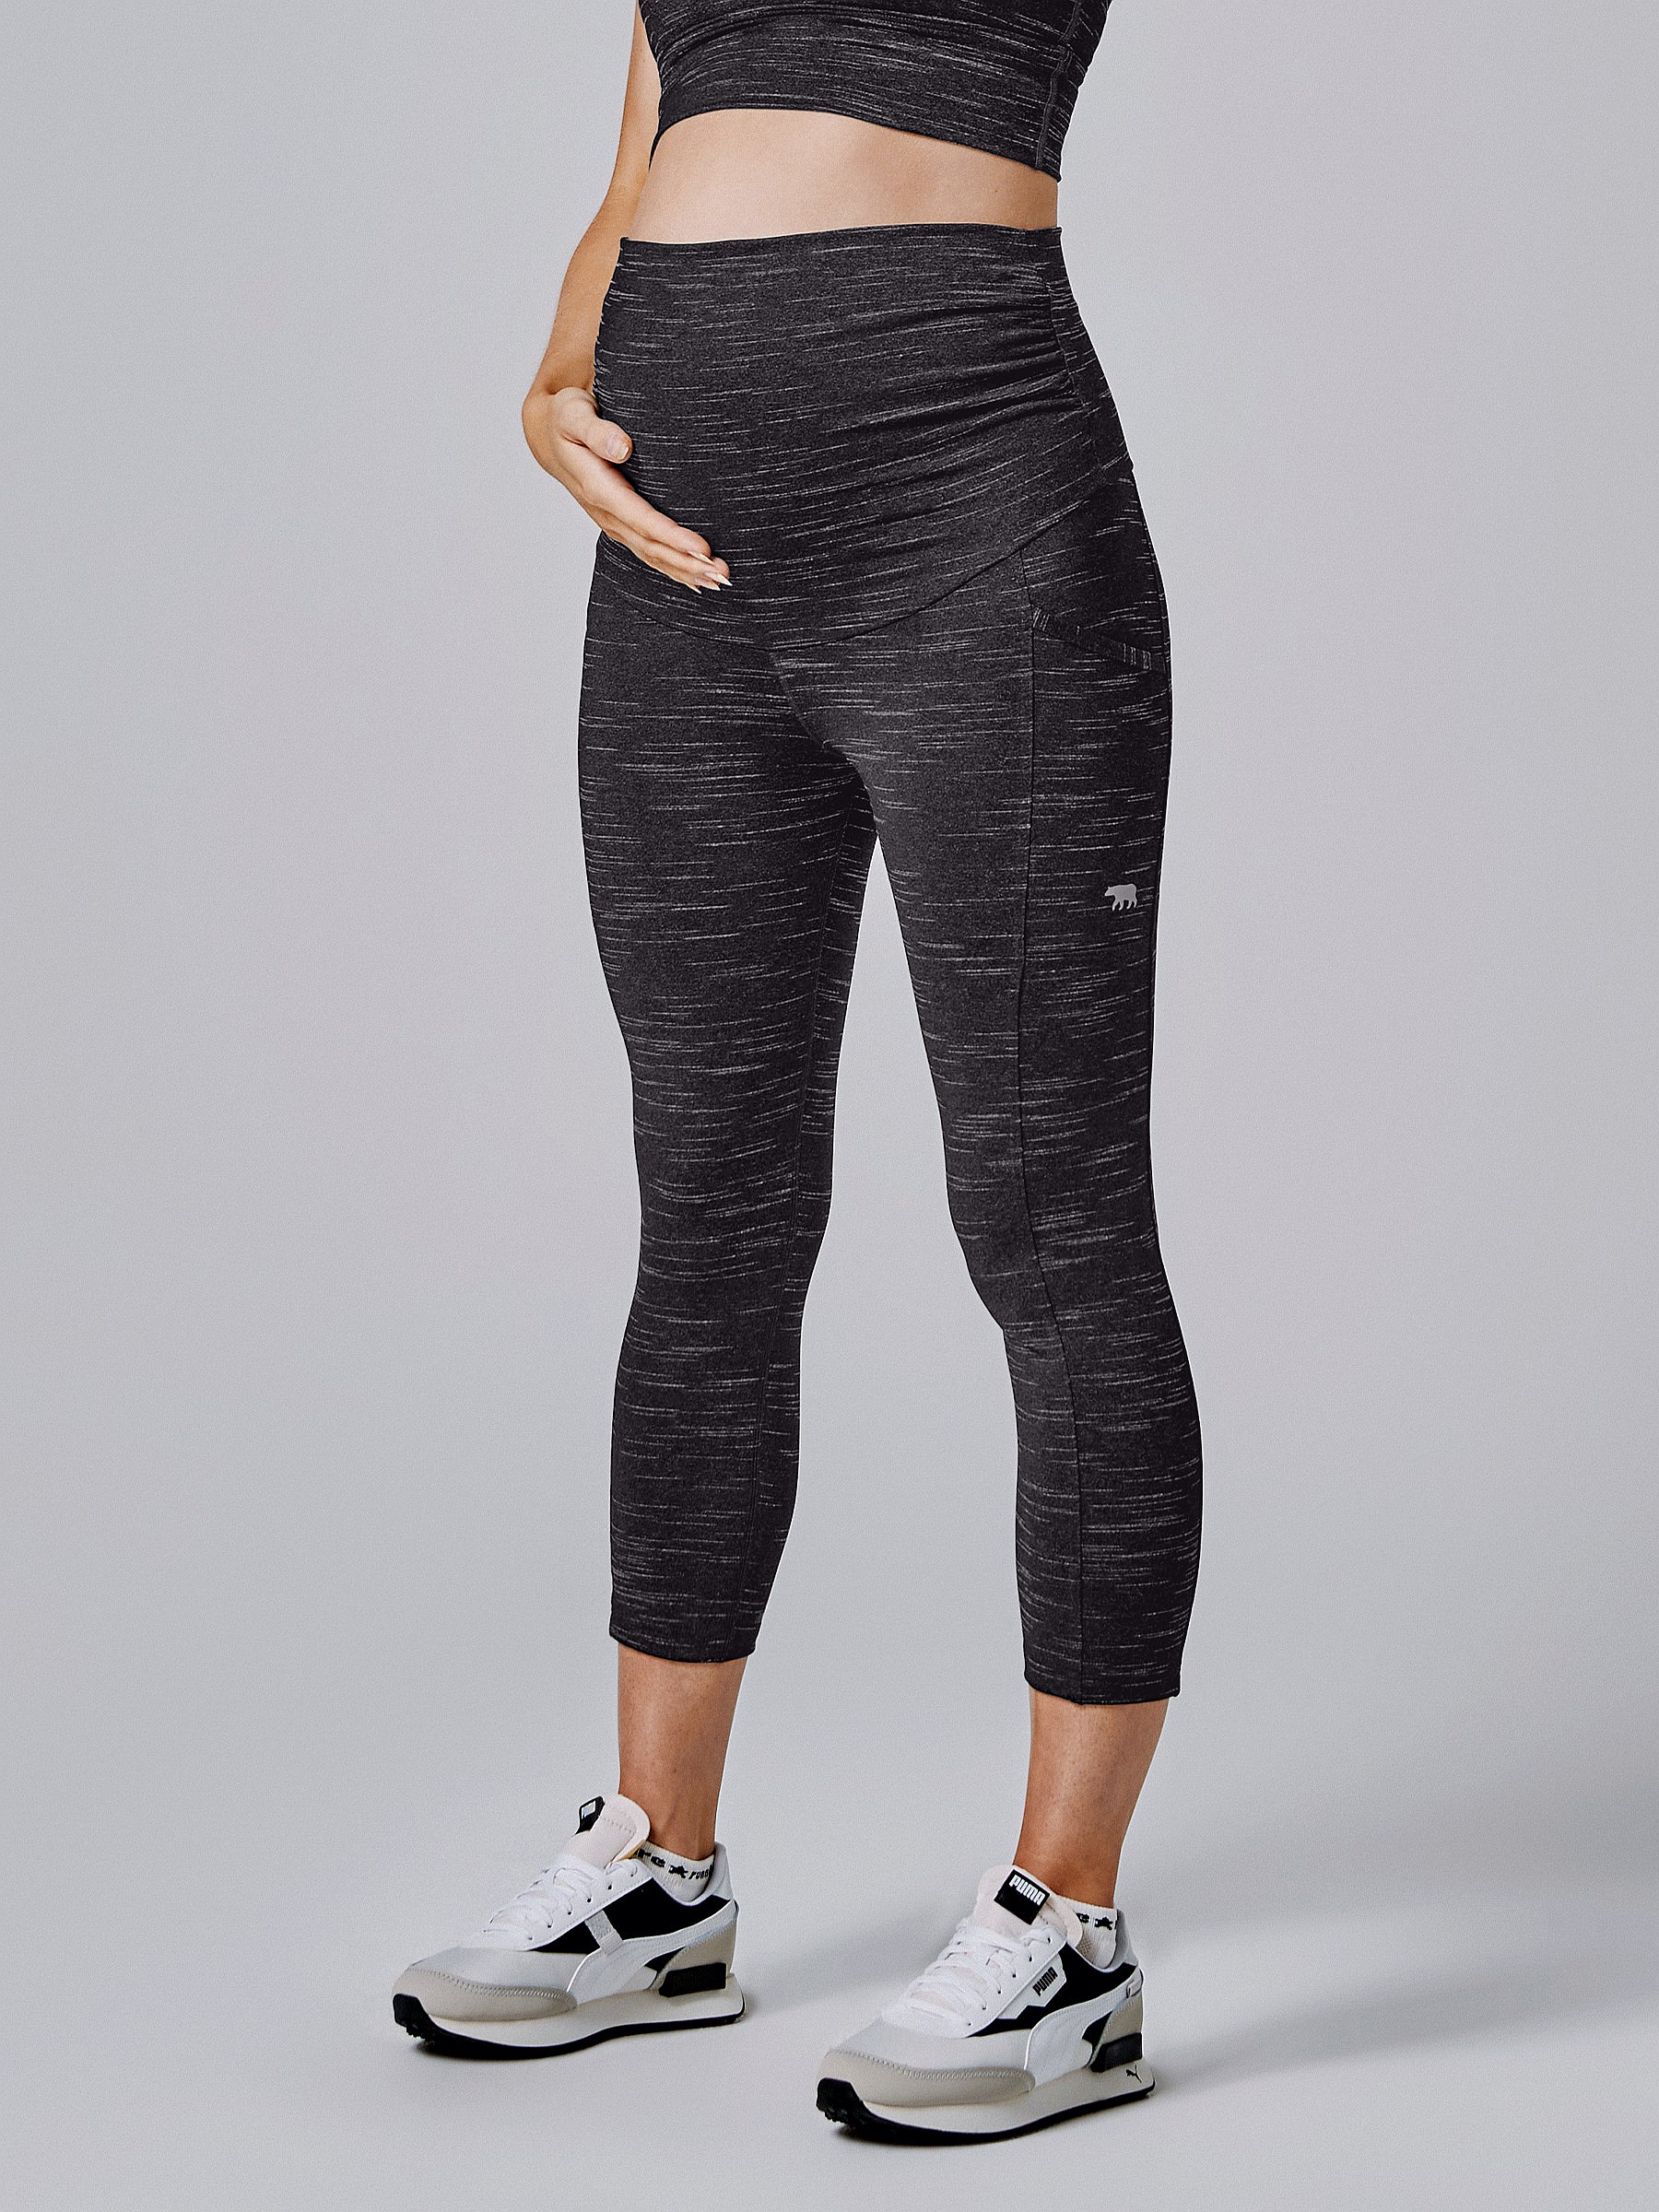 Running Bare Maternity Leggings. Womens Maternity Workout Tights